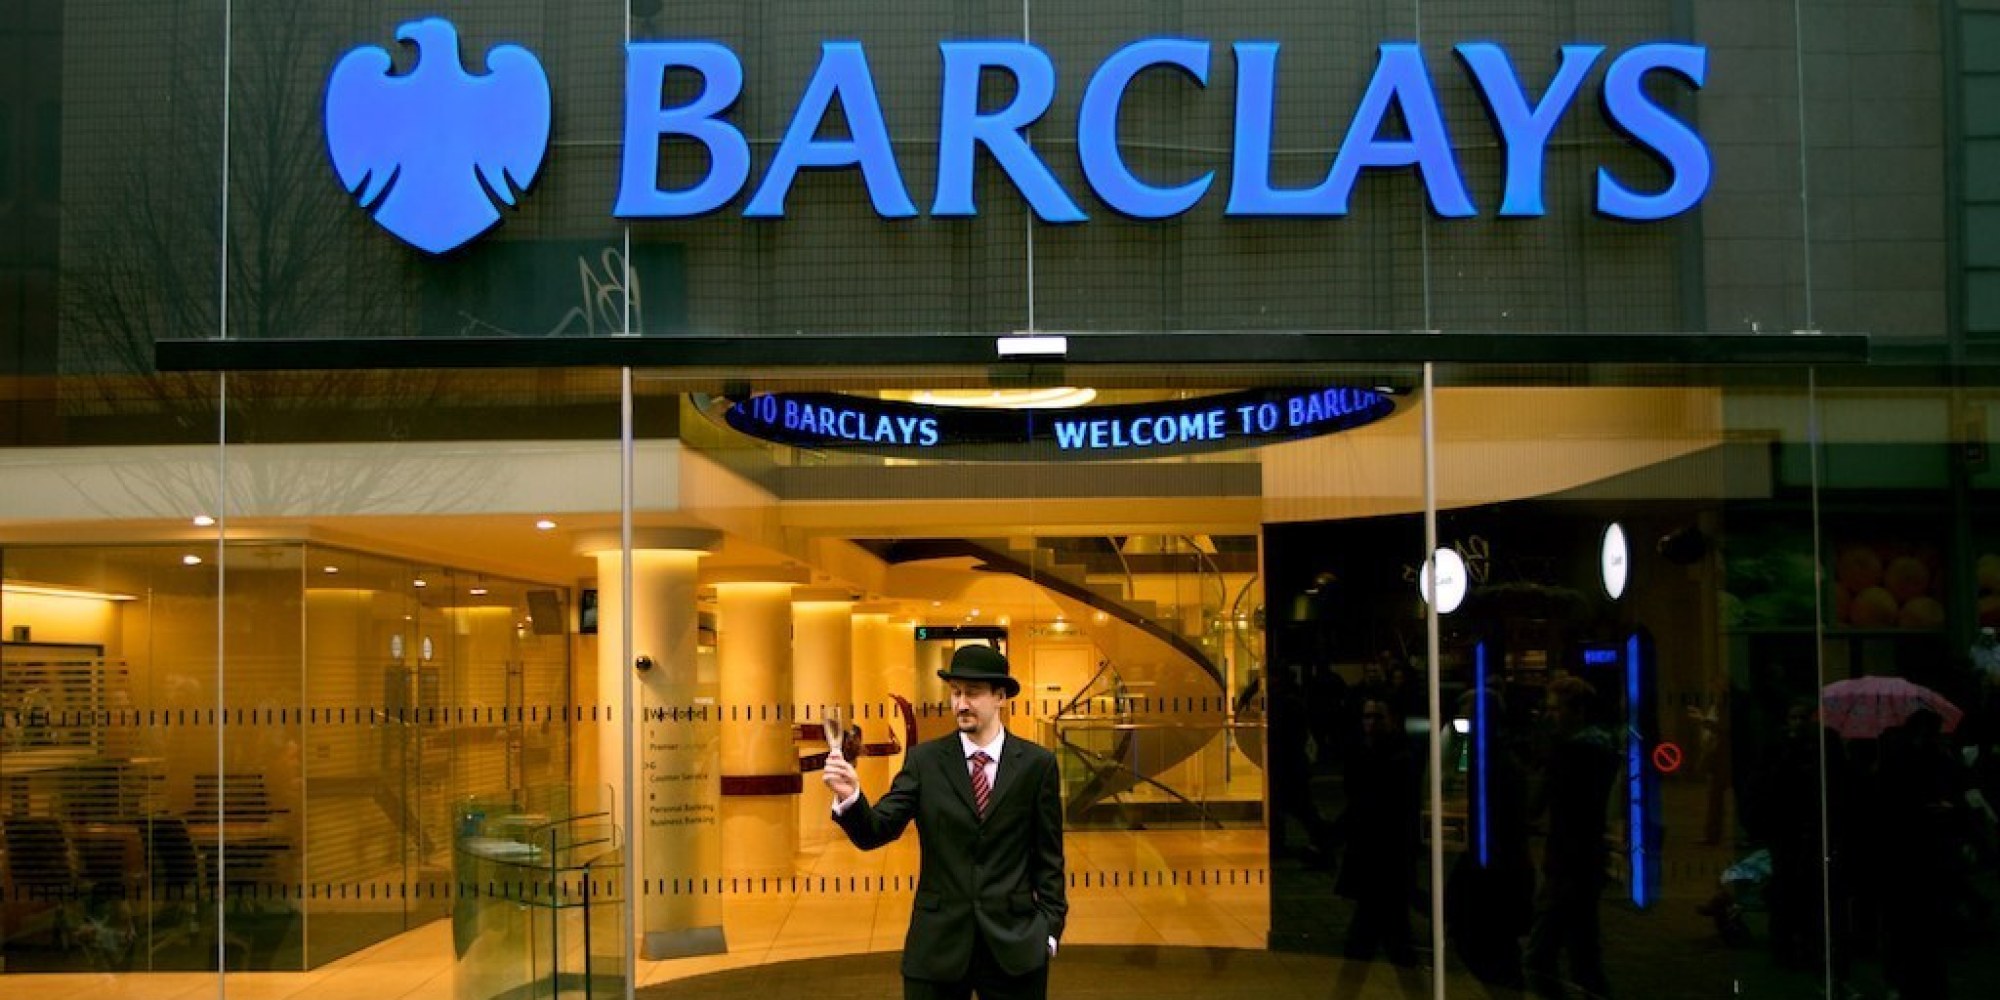 Barclays The Oldest Bank Of British And